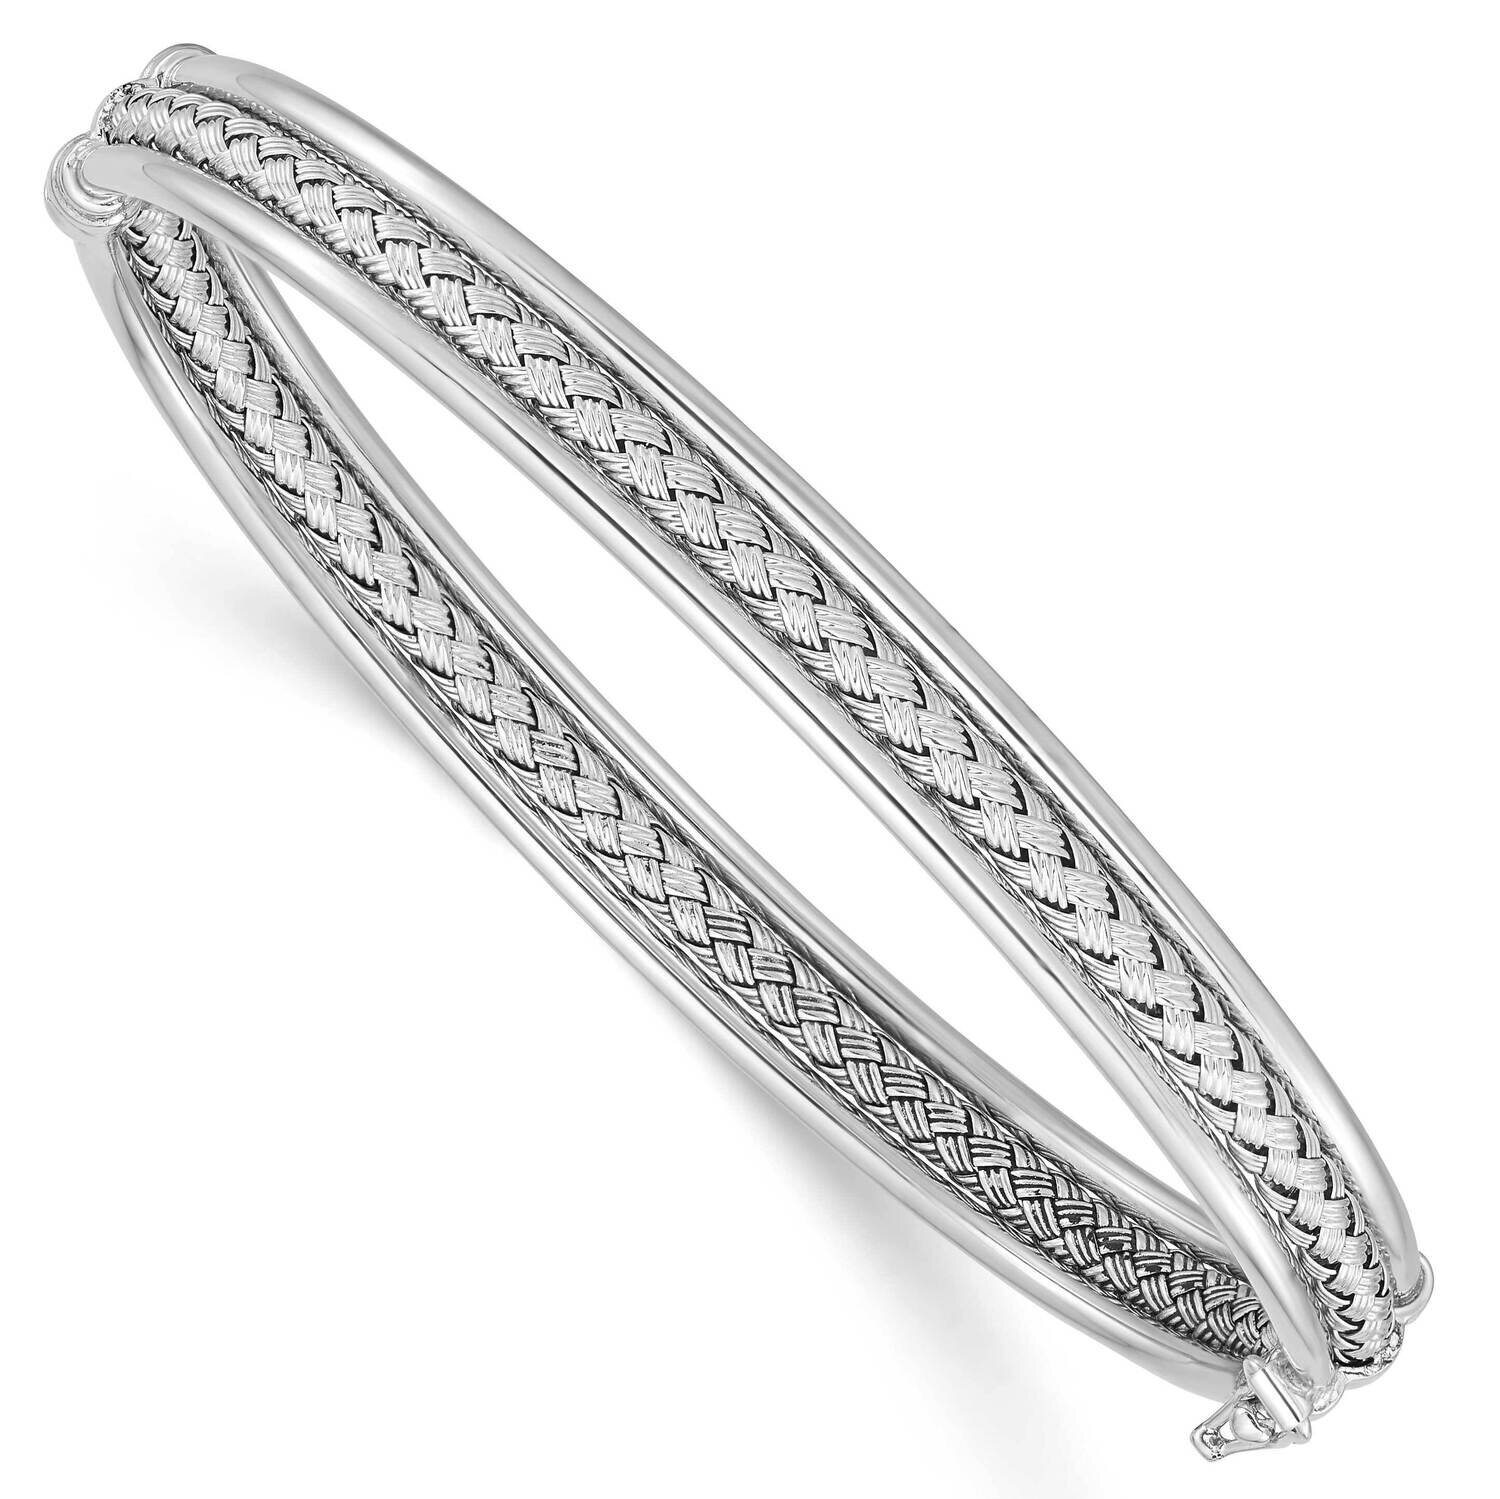 Weaved & Polished Hinged Bangle Sterling Silver Rhodium-Plated QB1422